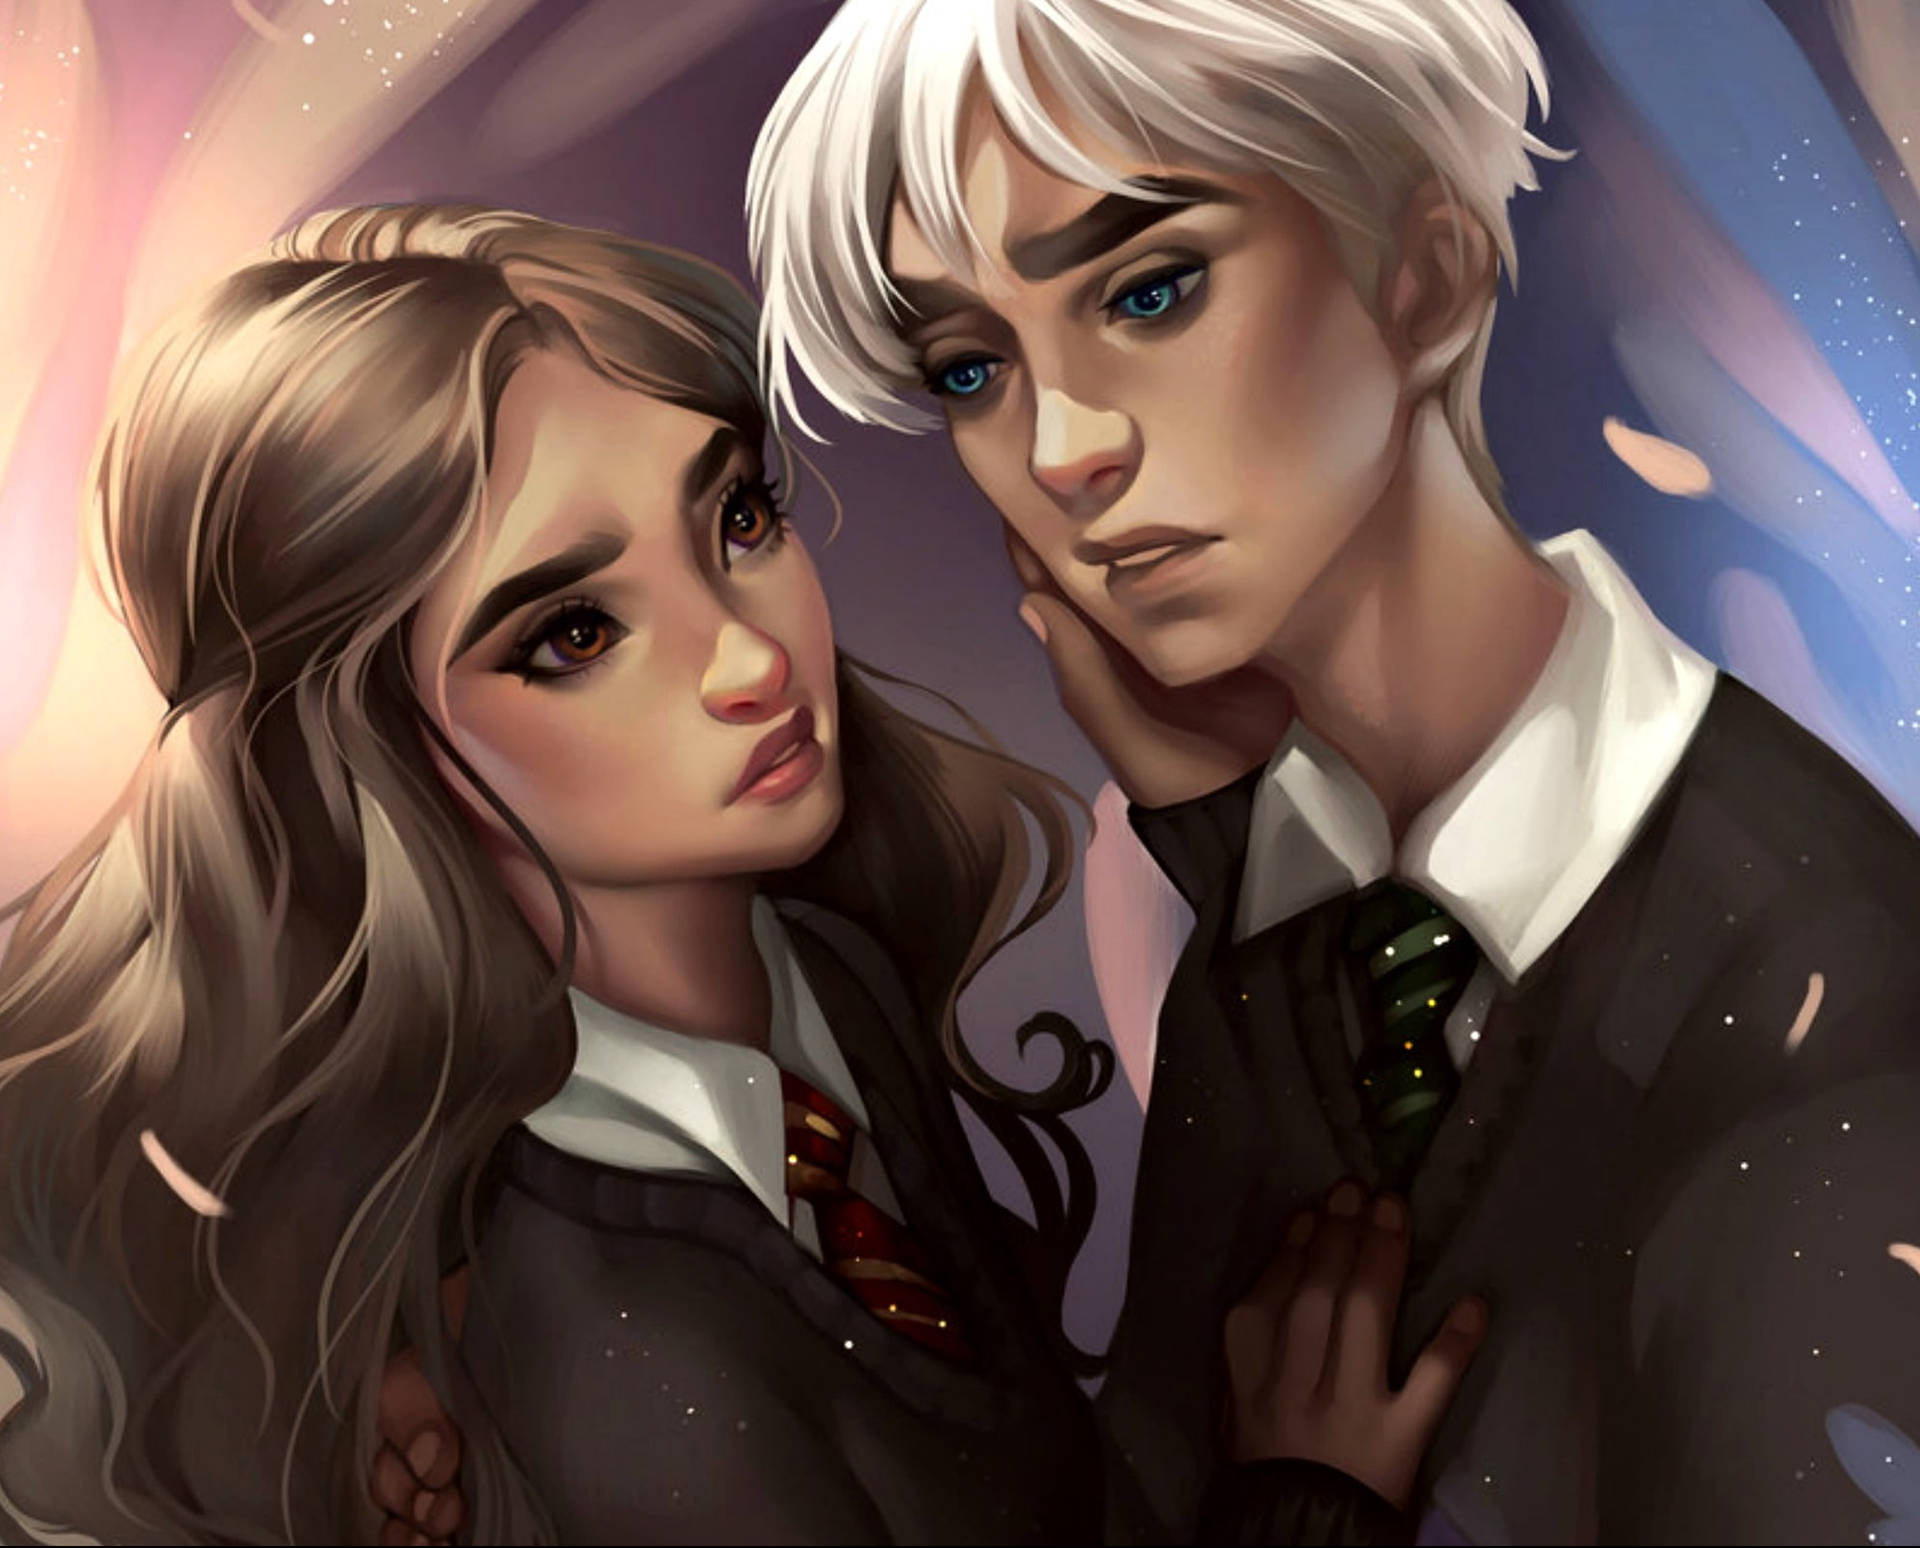 Hermione Granger and Draco Malfoy Duel It Out. Wallpaper